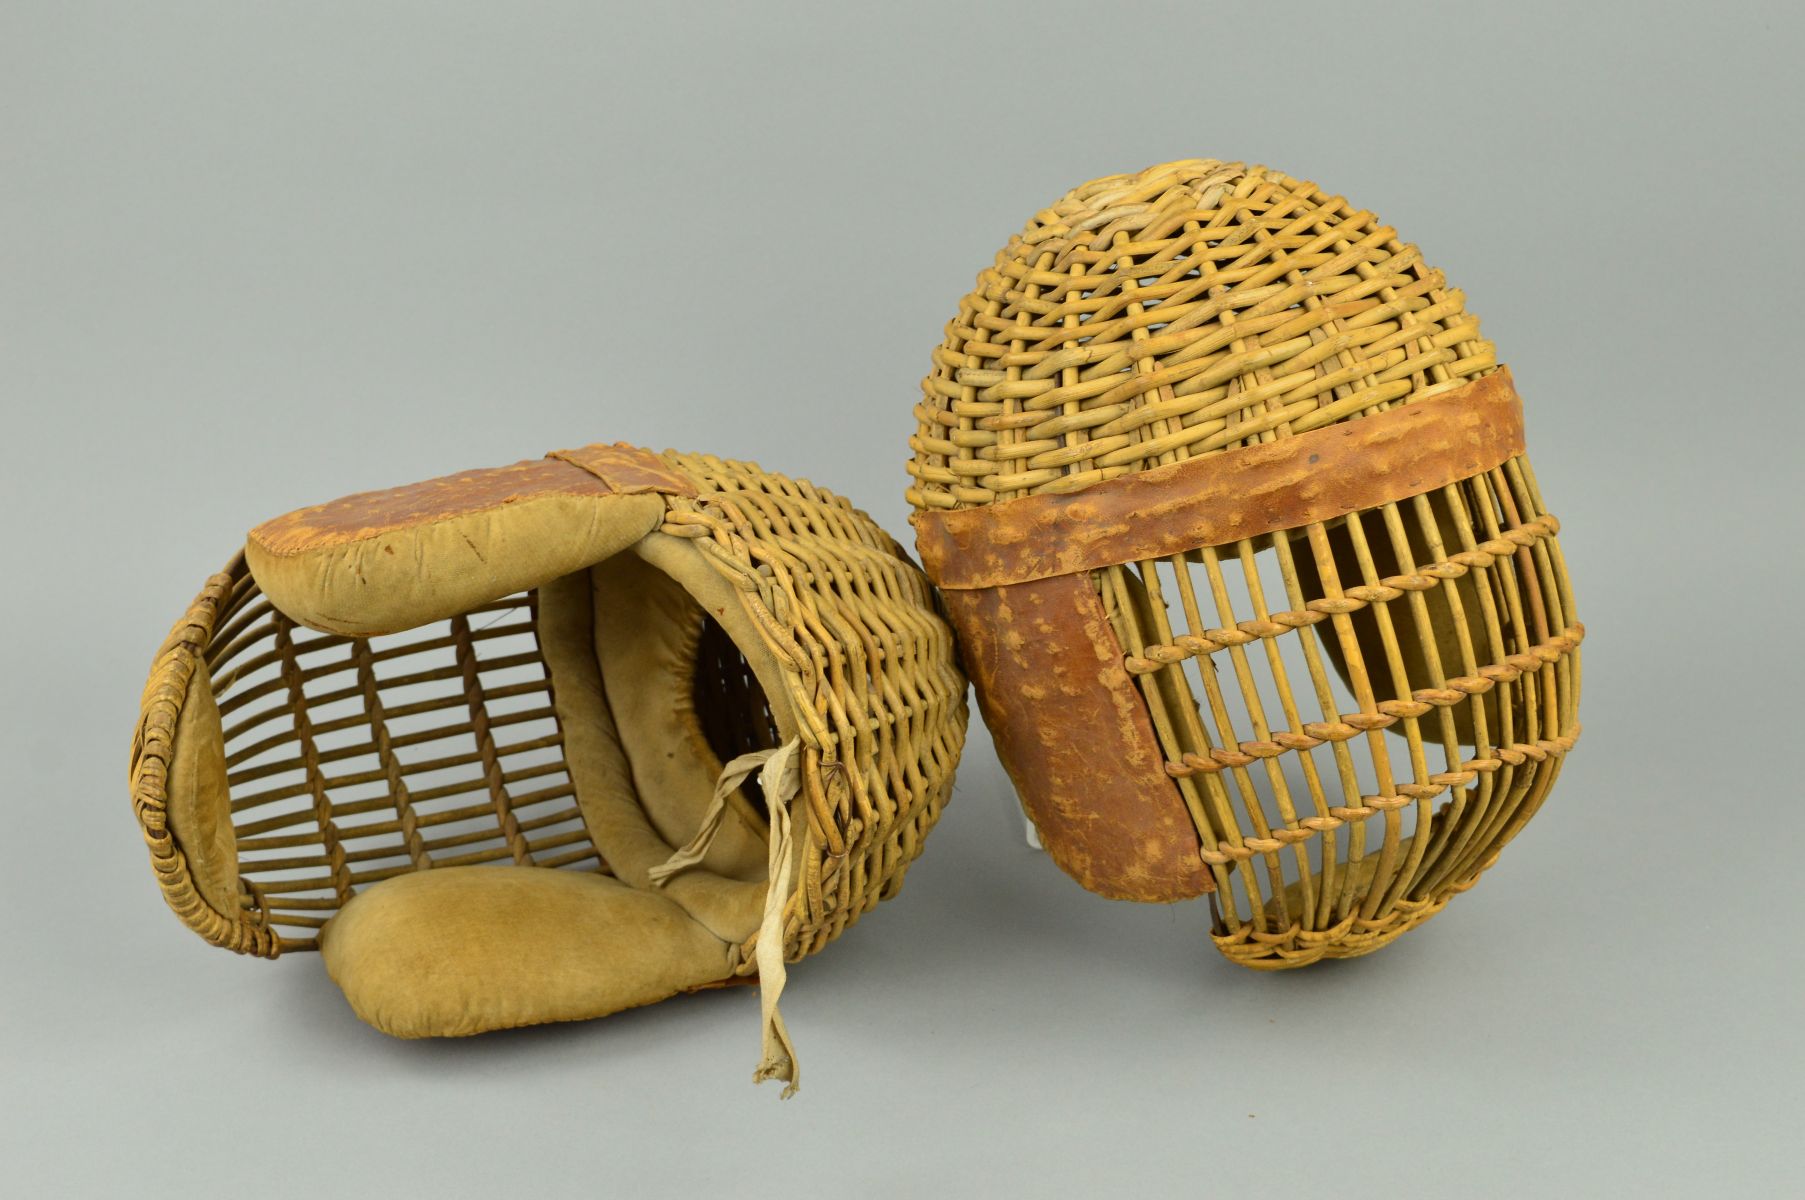 TWO LATE 19TH/EARLY 20TH CENTURY JAPANESE 'KENDO' FACEMASKS, constructed in wicker style, with - Image 3 of 4